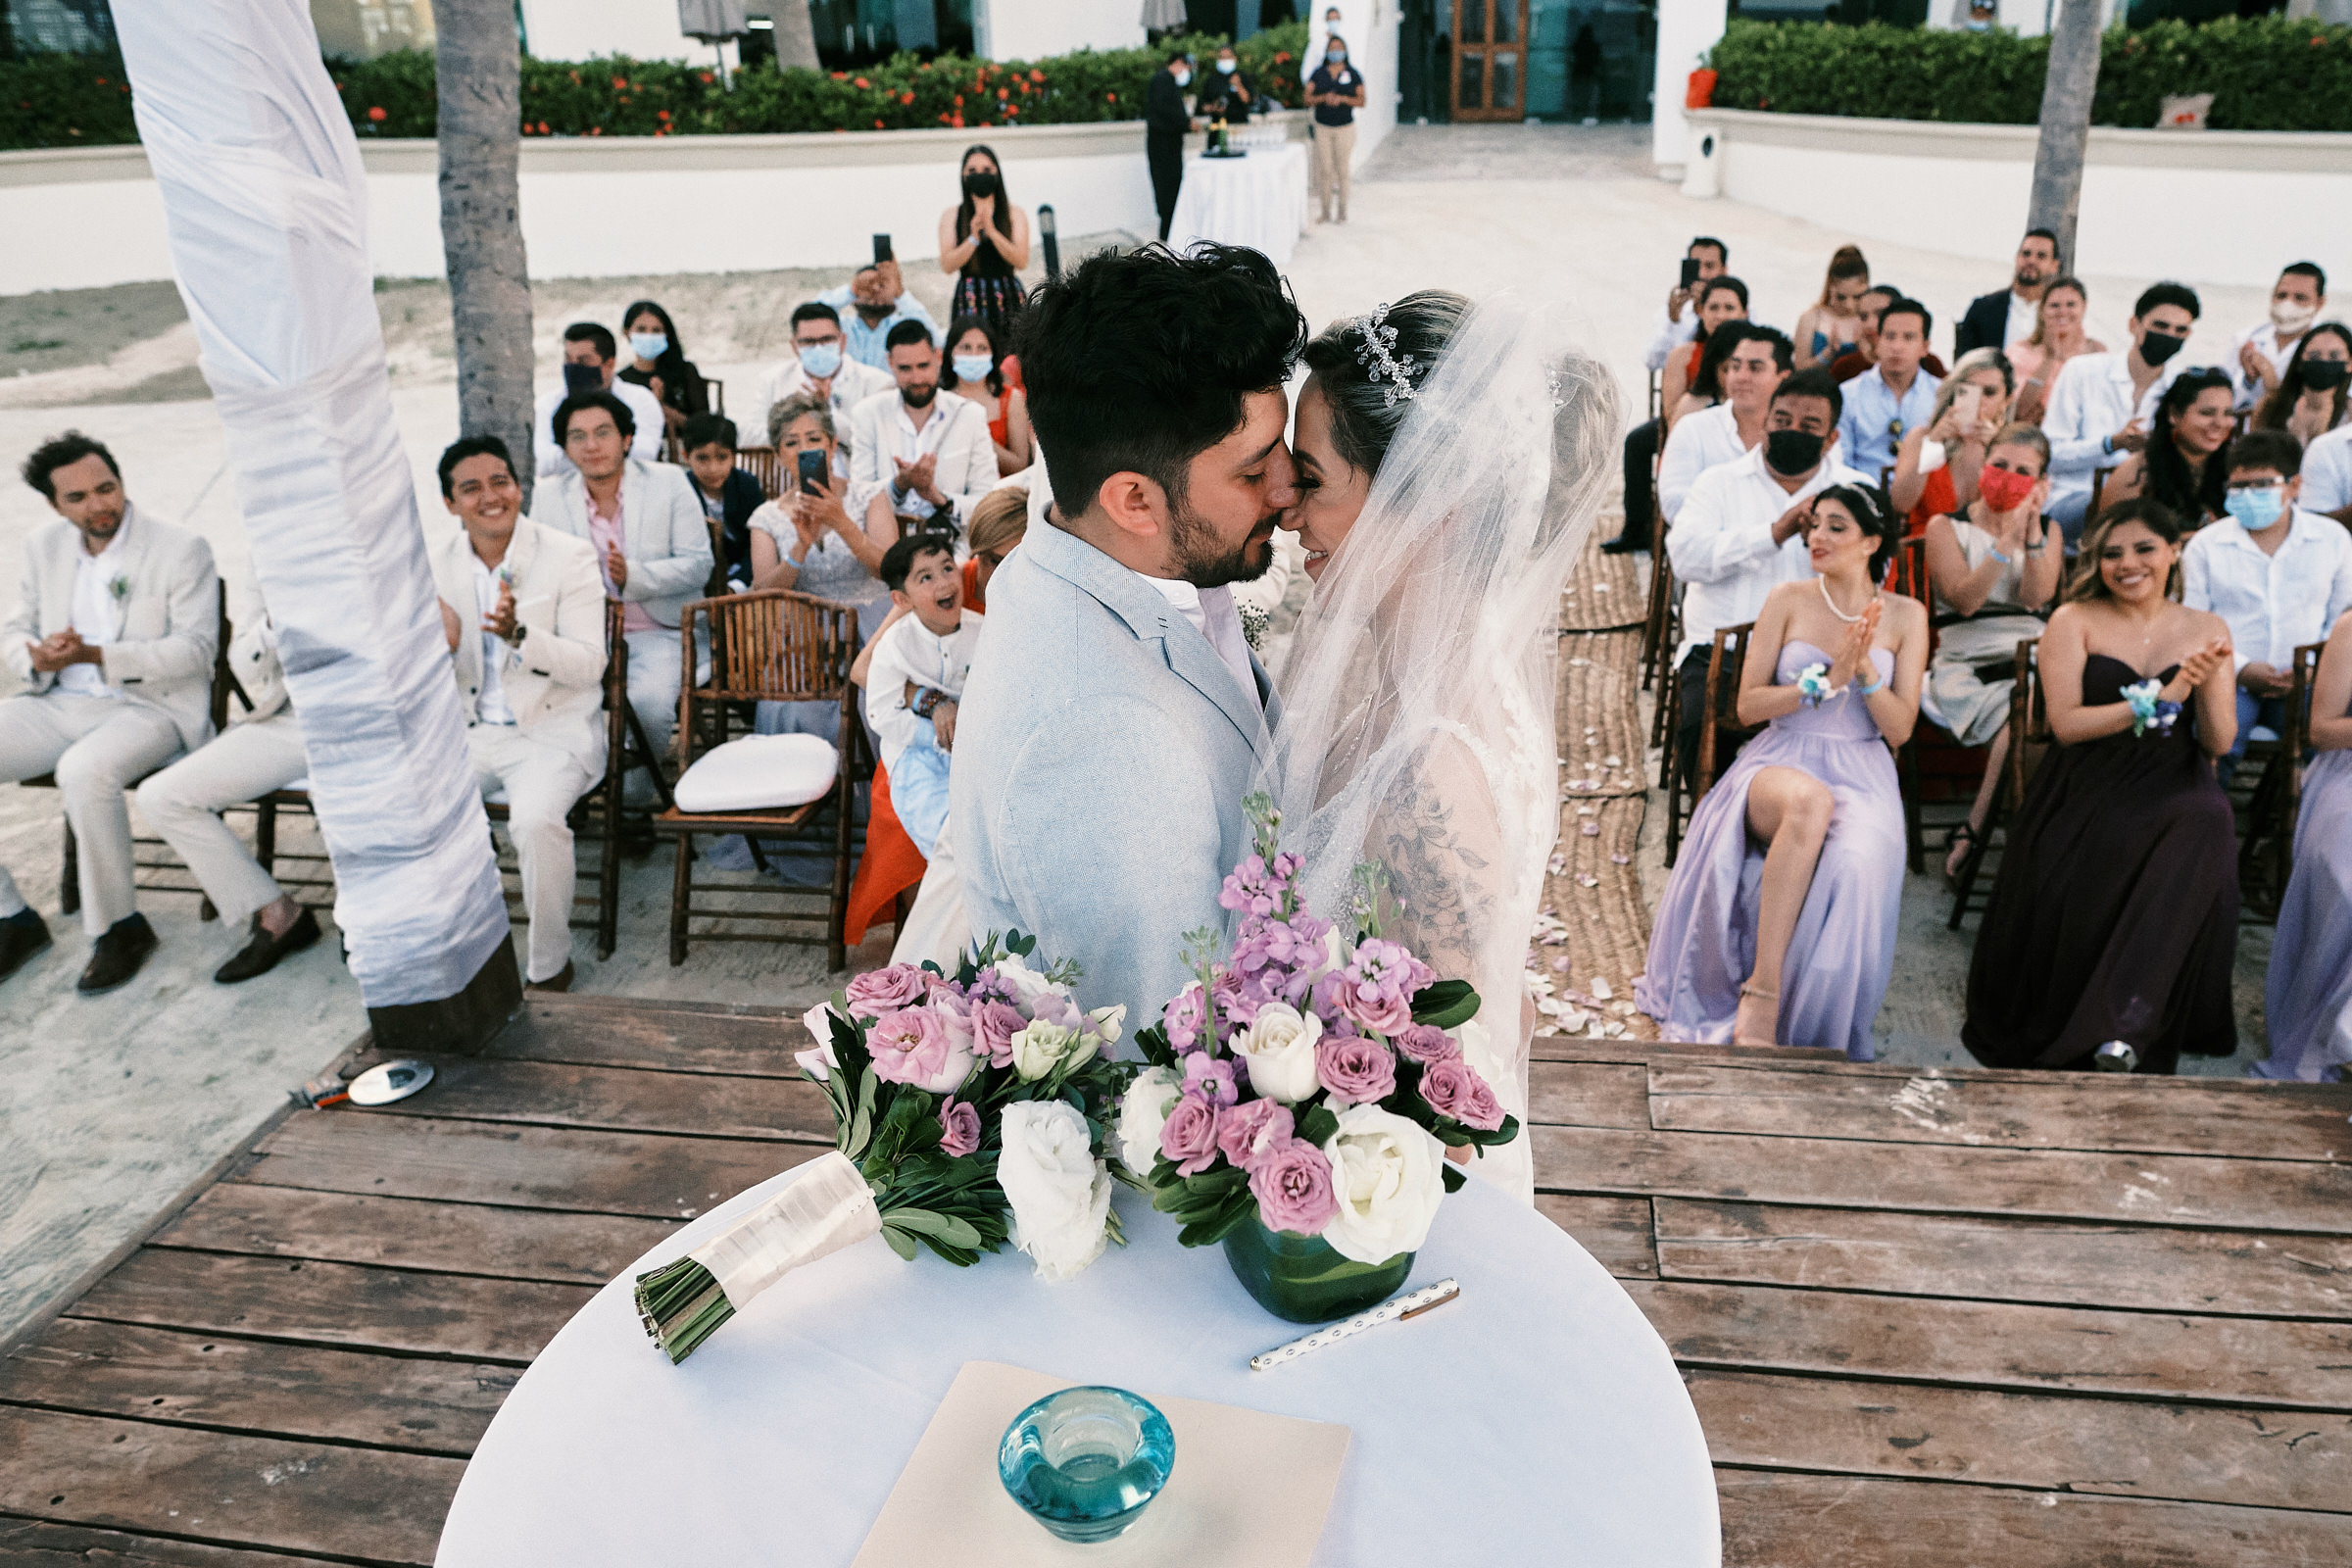 https://www.skillshare.com/classes/Mastering-Golden-Hour-Portrait-Photography/2136745324 bride and groom face one another in front of guests and family in destination wedding at playa del carmen mexico bluebay grand esmeralda